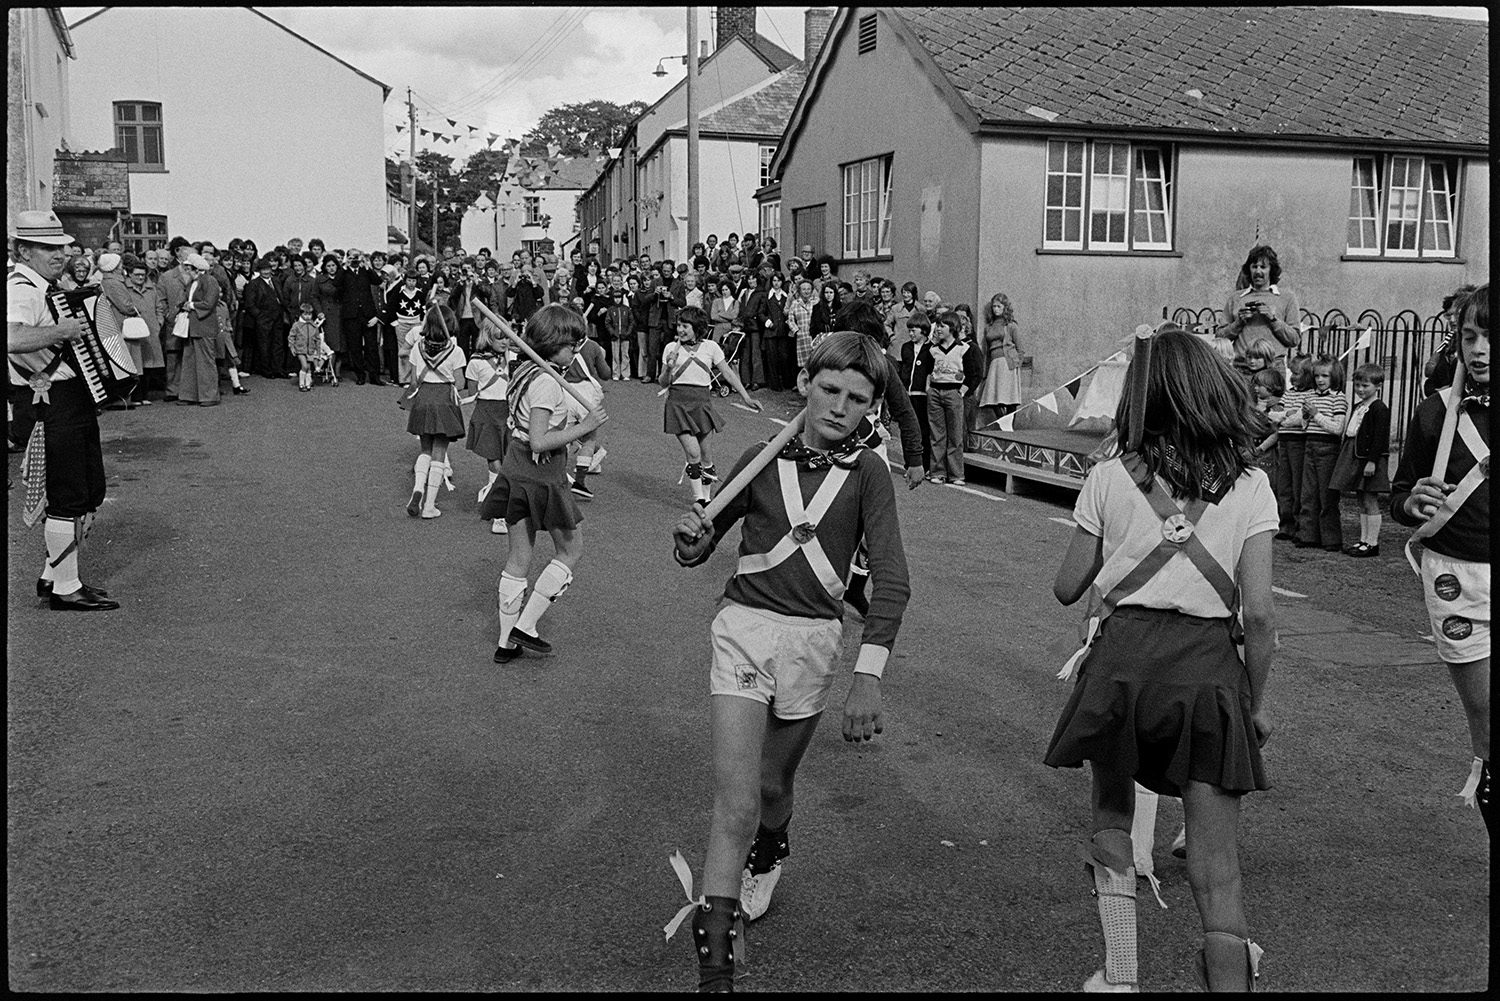 Children Morris dancing in village street. 
[Child Morris Dancers performing in a street in High Bickington as part of the celebrations for the Silver Jubilee of Queen Elizabeth II. A man is playing the accordion for them and a crowd is watching from further up the street. A street in the background is decorated with bunting,]